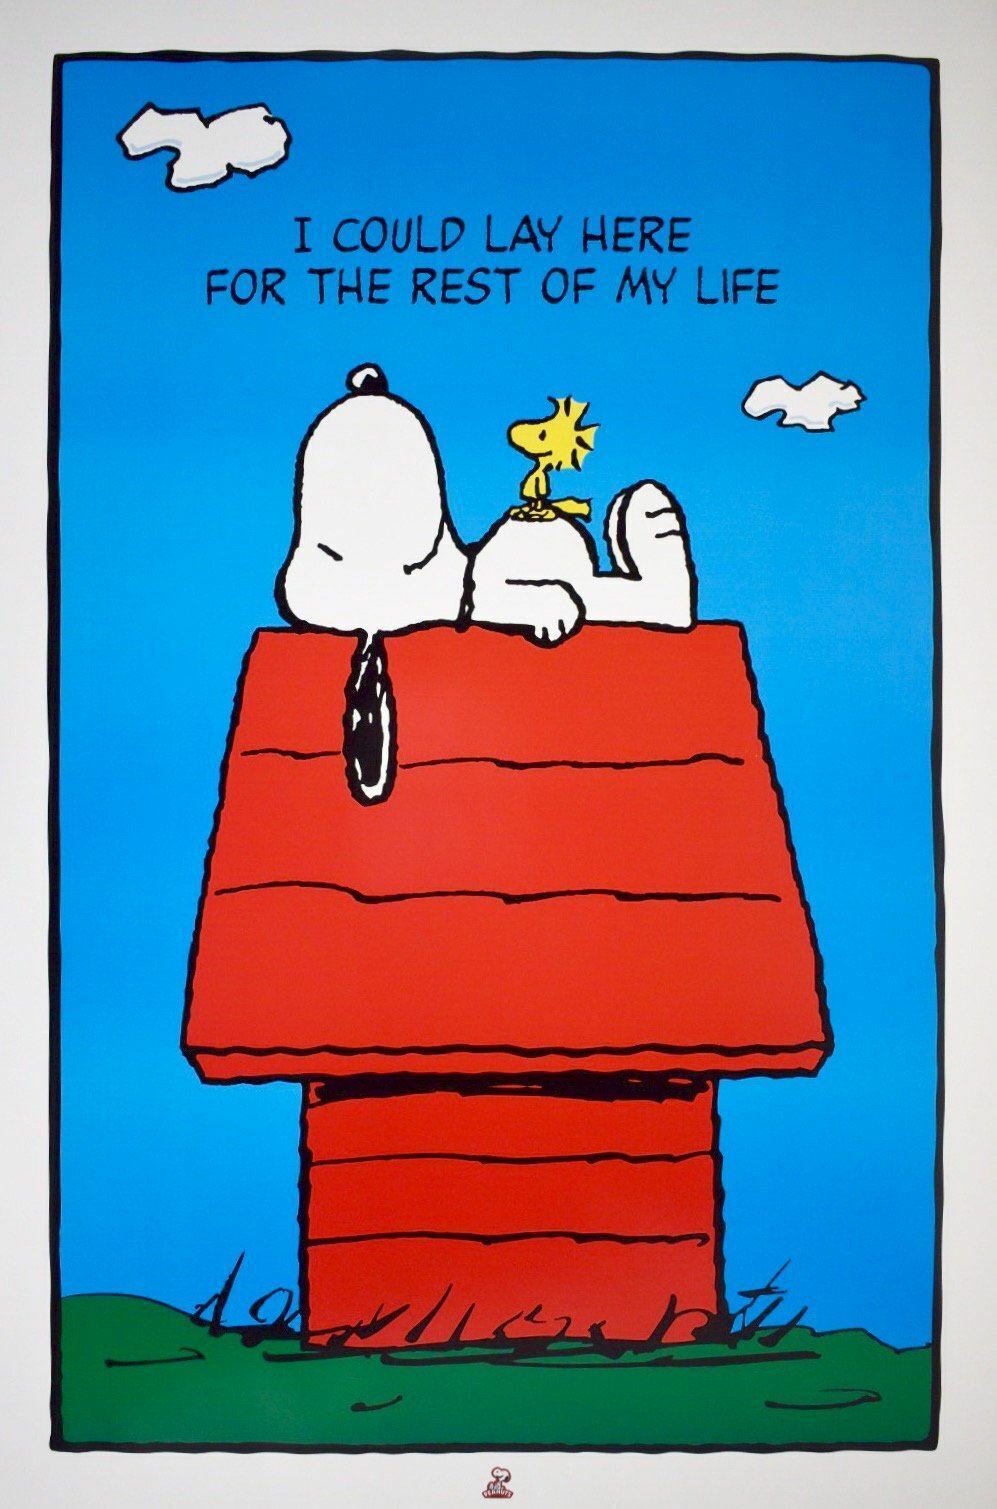 Snoopy & Woodstock “I Could lay here for the rest of my life” Poster 24 x 36